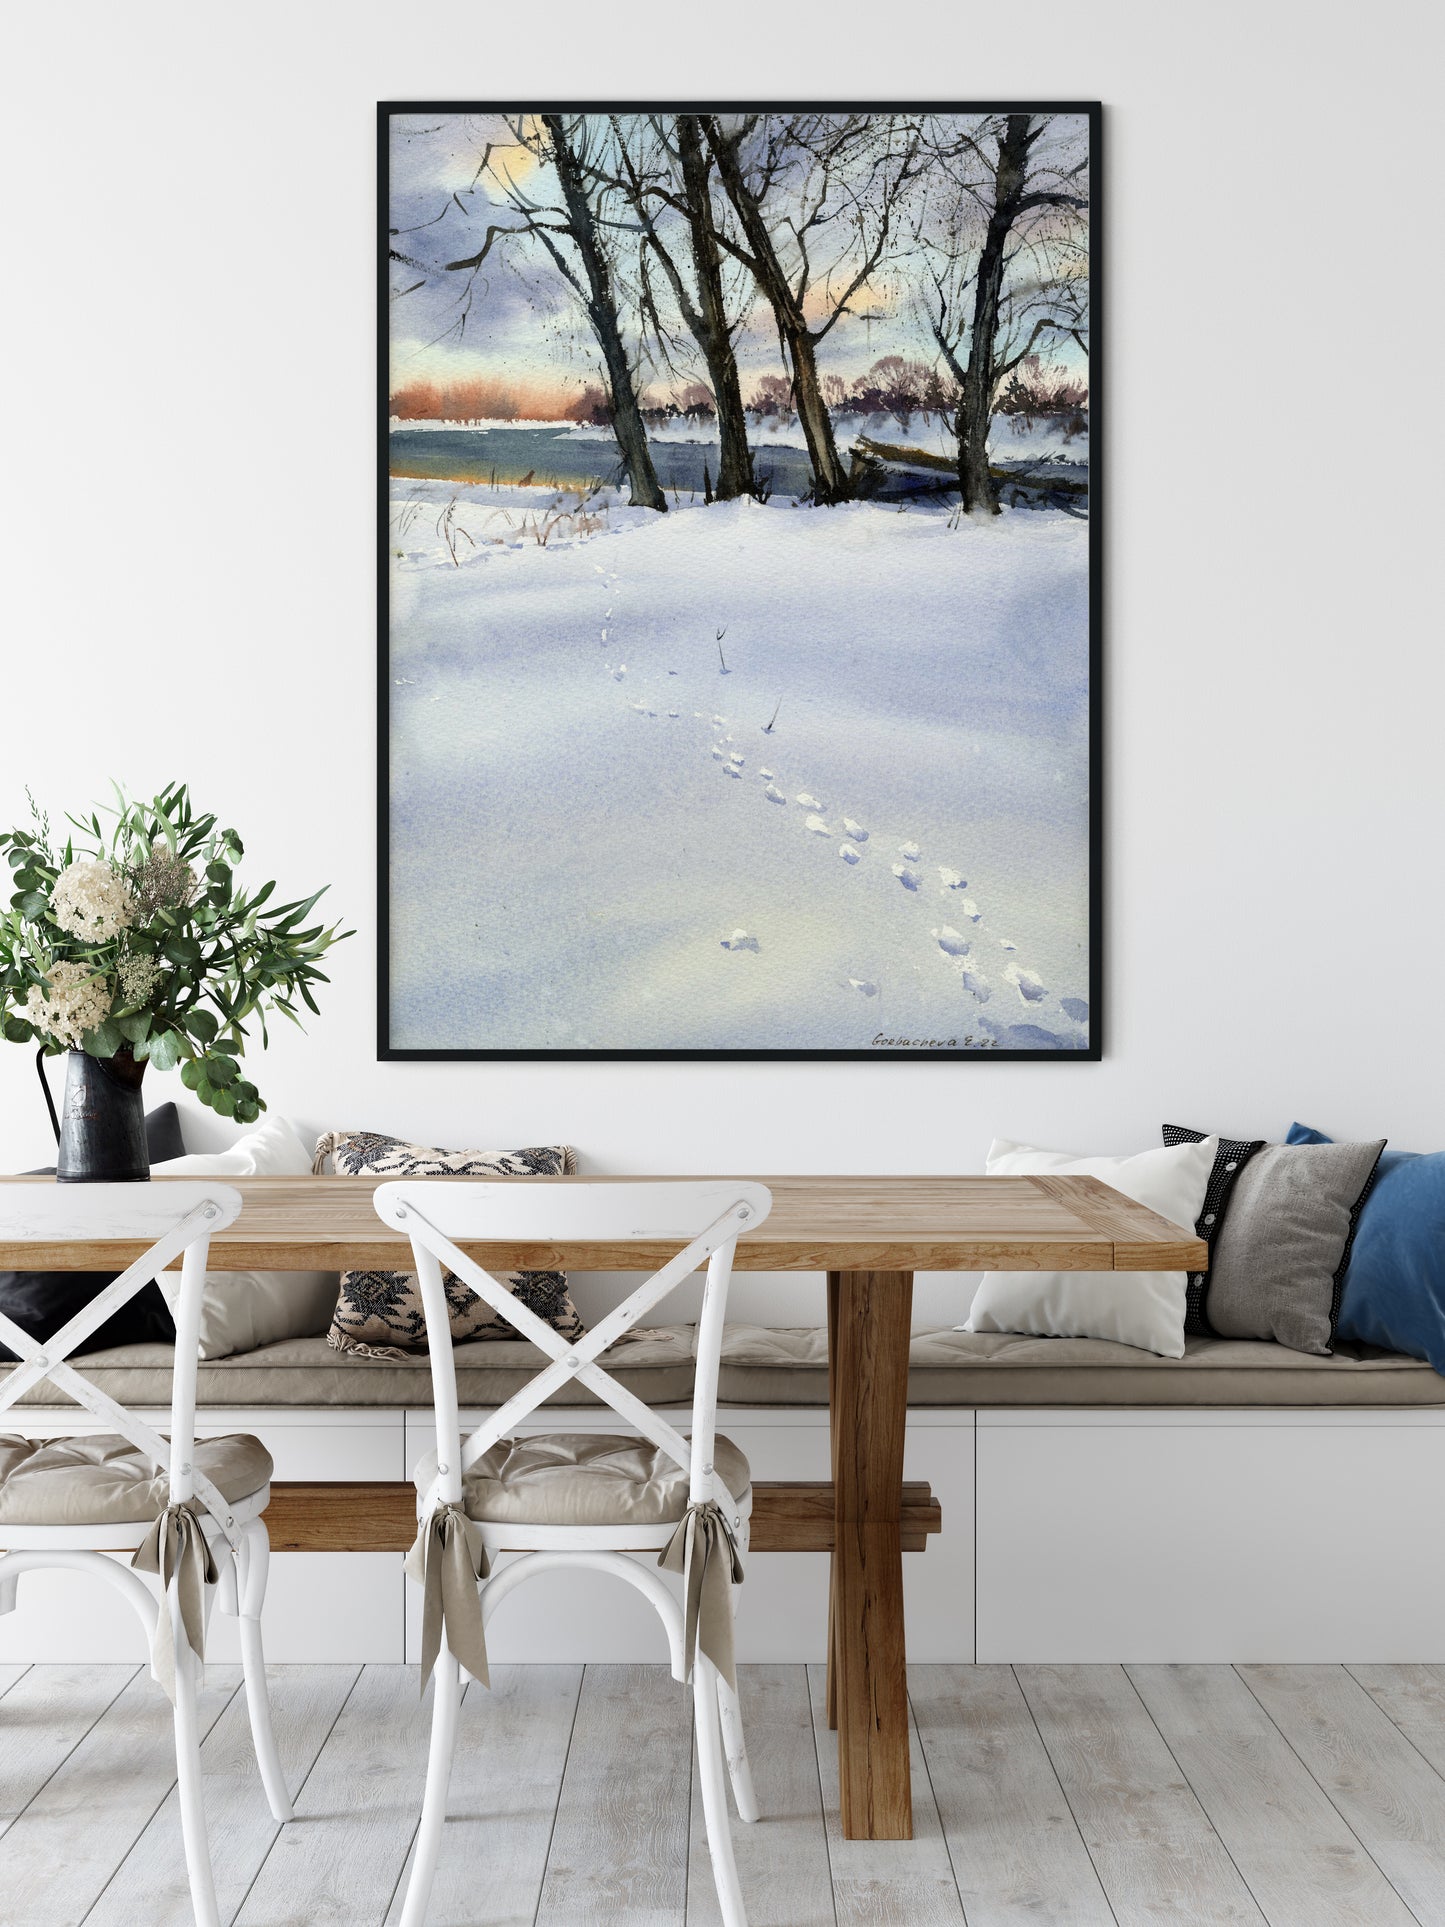 Winter Forest Art Print, Watercolor Landscape Painting, House Wall Decor, Canvas Print, Snowy Field Trees, Night Sky, Gift for Home